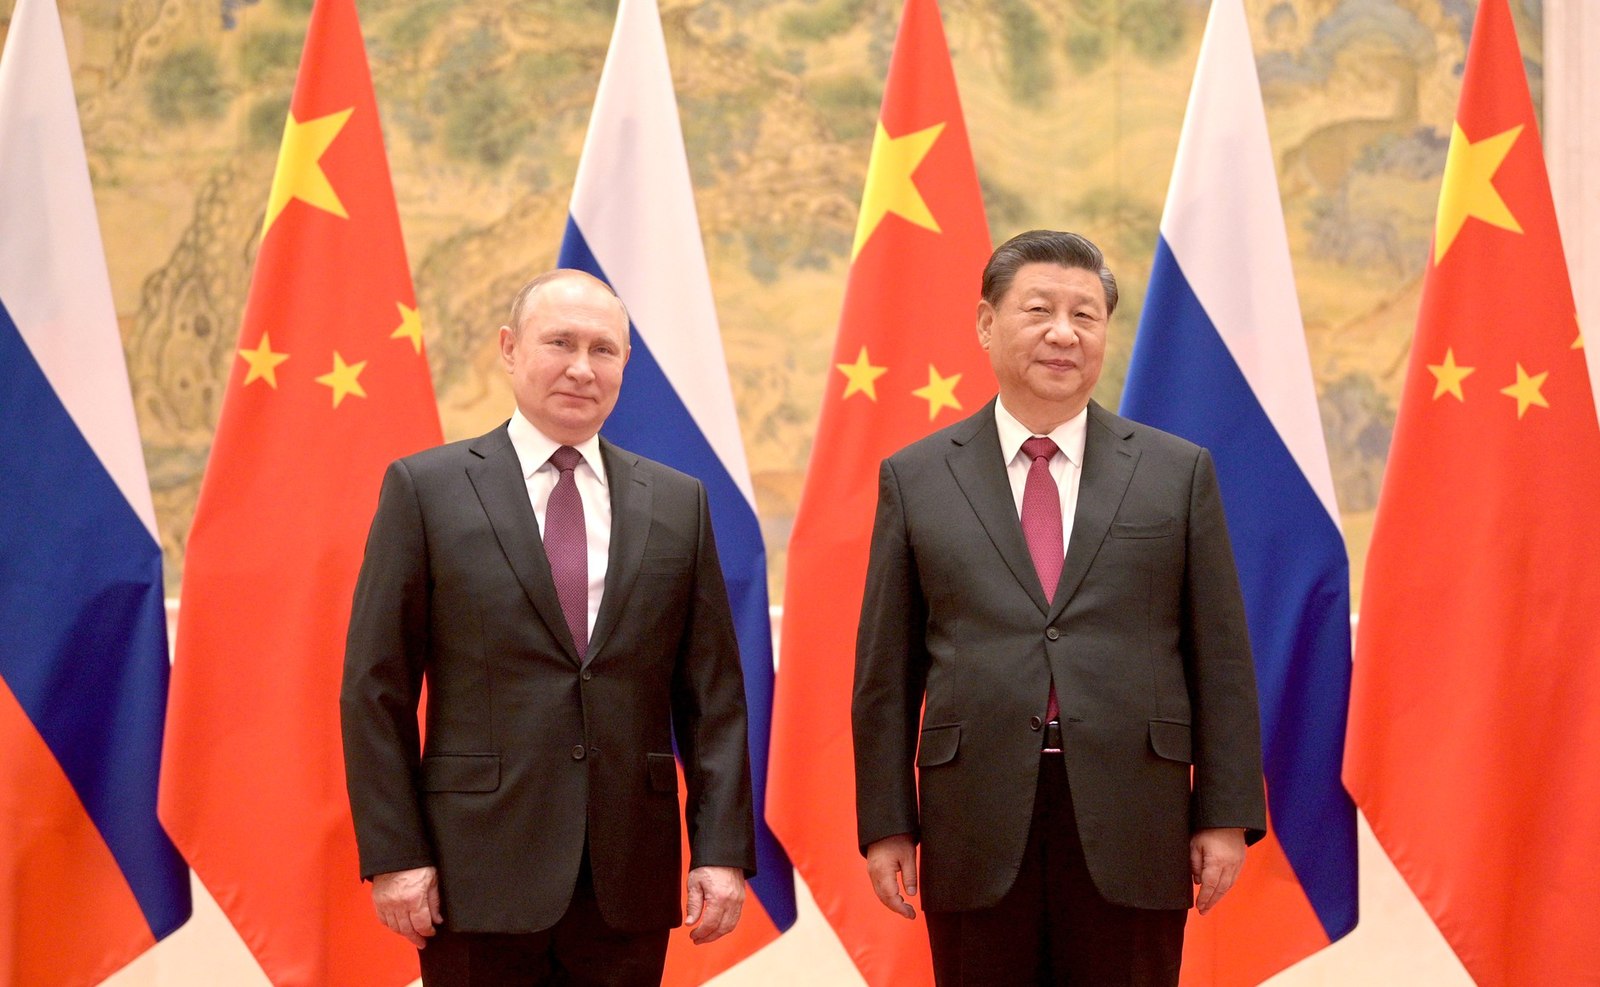 The war in Ukraine looked like a win-win situation for China. That is now changing